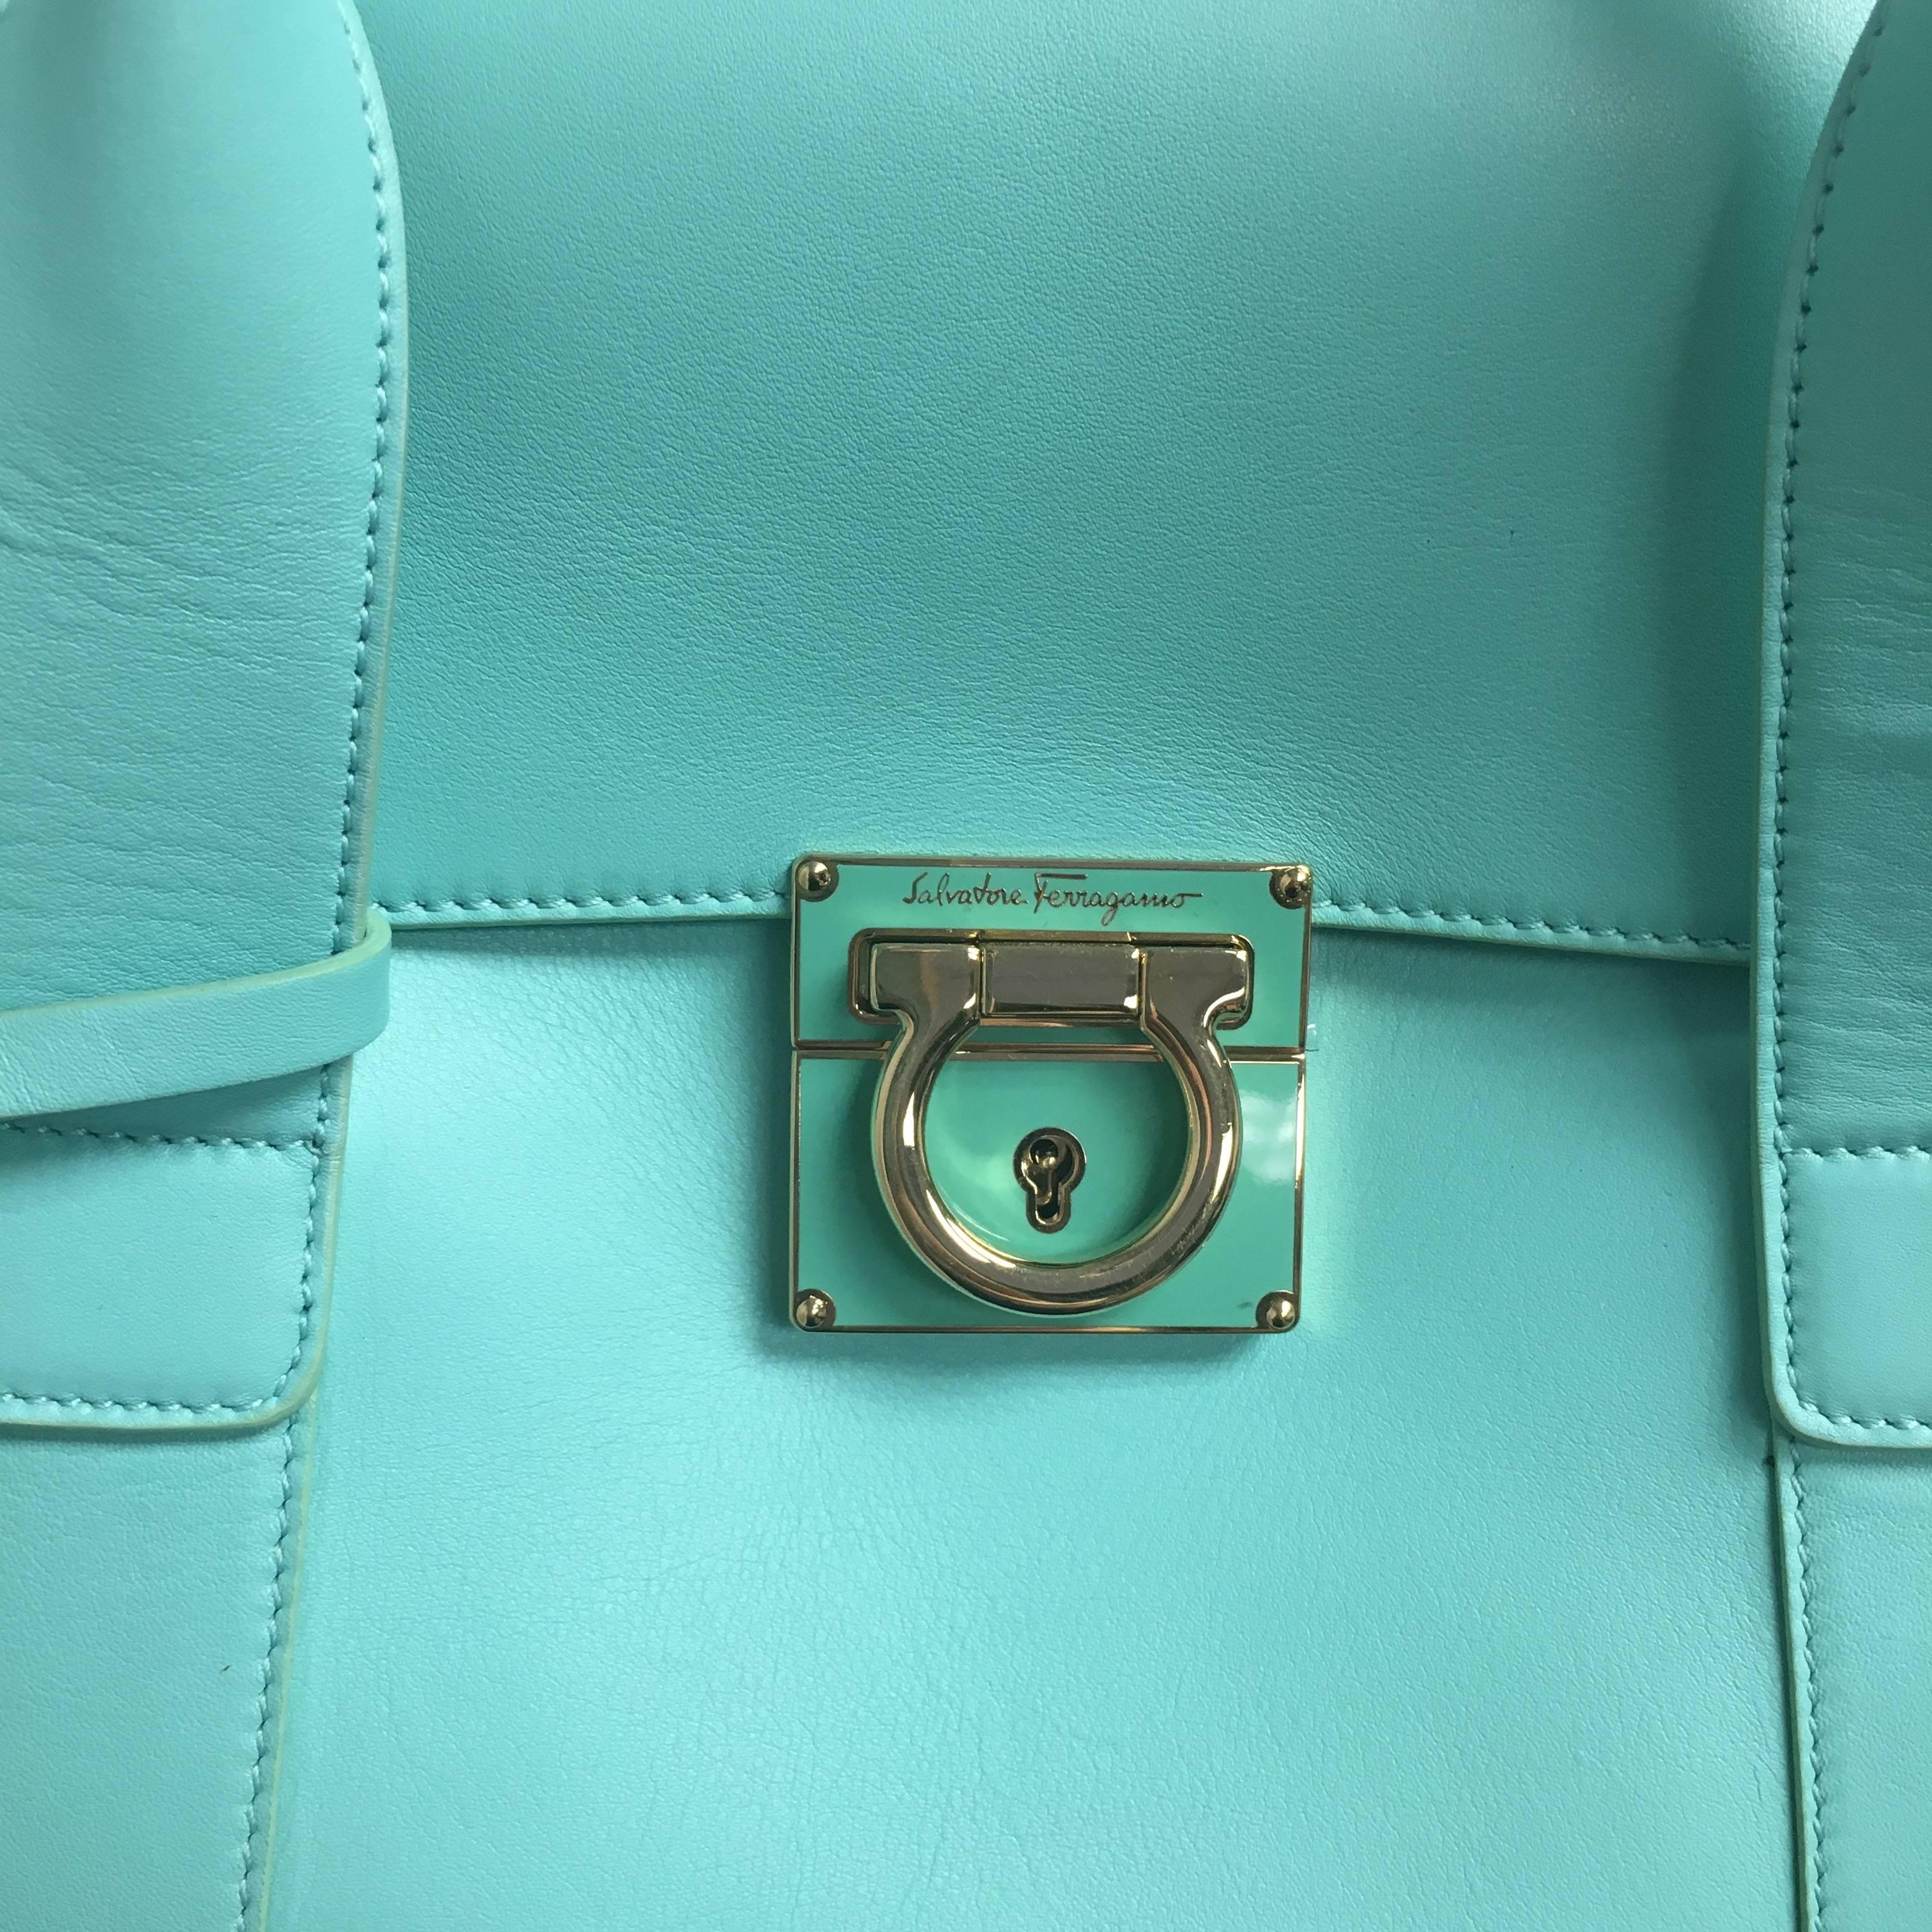 Detailed in pretty pastel turquoise, Salvatore Ferragamo's smooth leather tote is an excellent summer bag choice. Flap with logo hinged lock closure, double top handles with key fob attached. Inside, removable leashed zip pouch.
Leather lining.